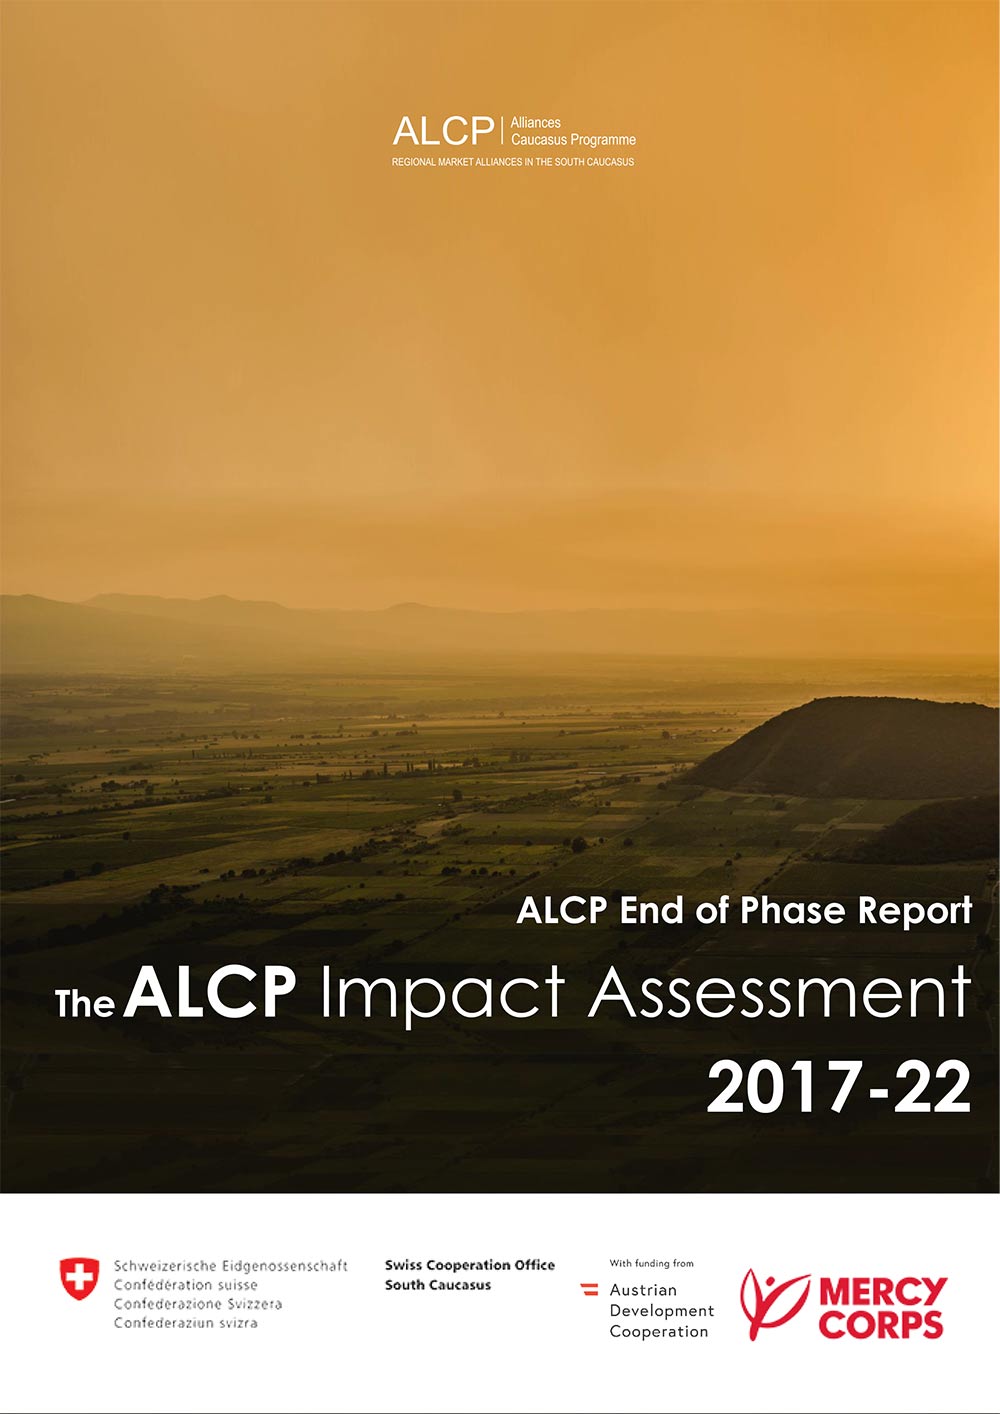 ALCP End of Phase Report Impact Assessment 2017-2022